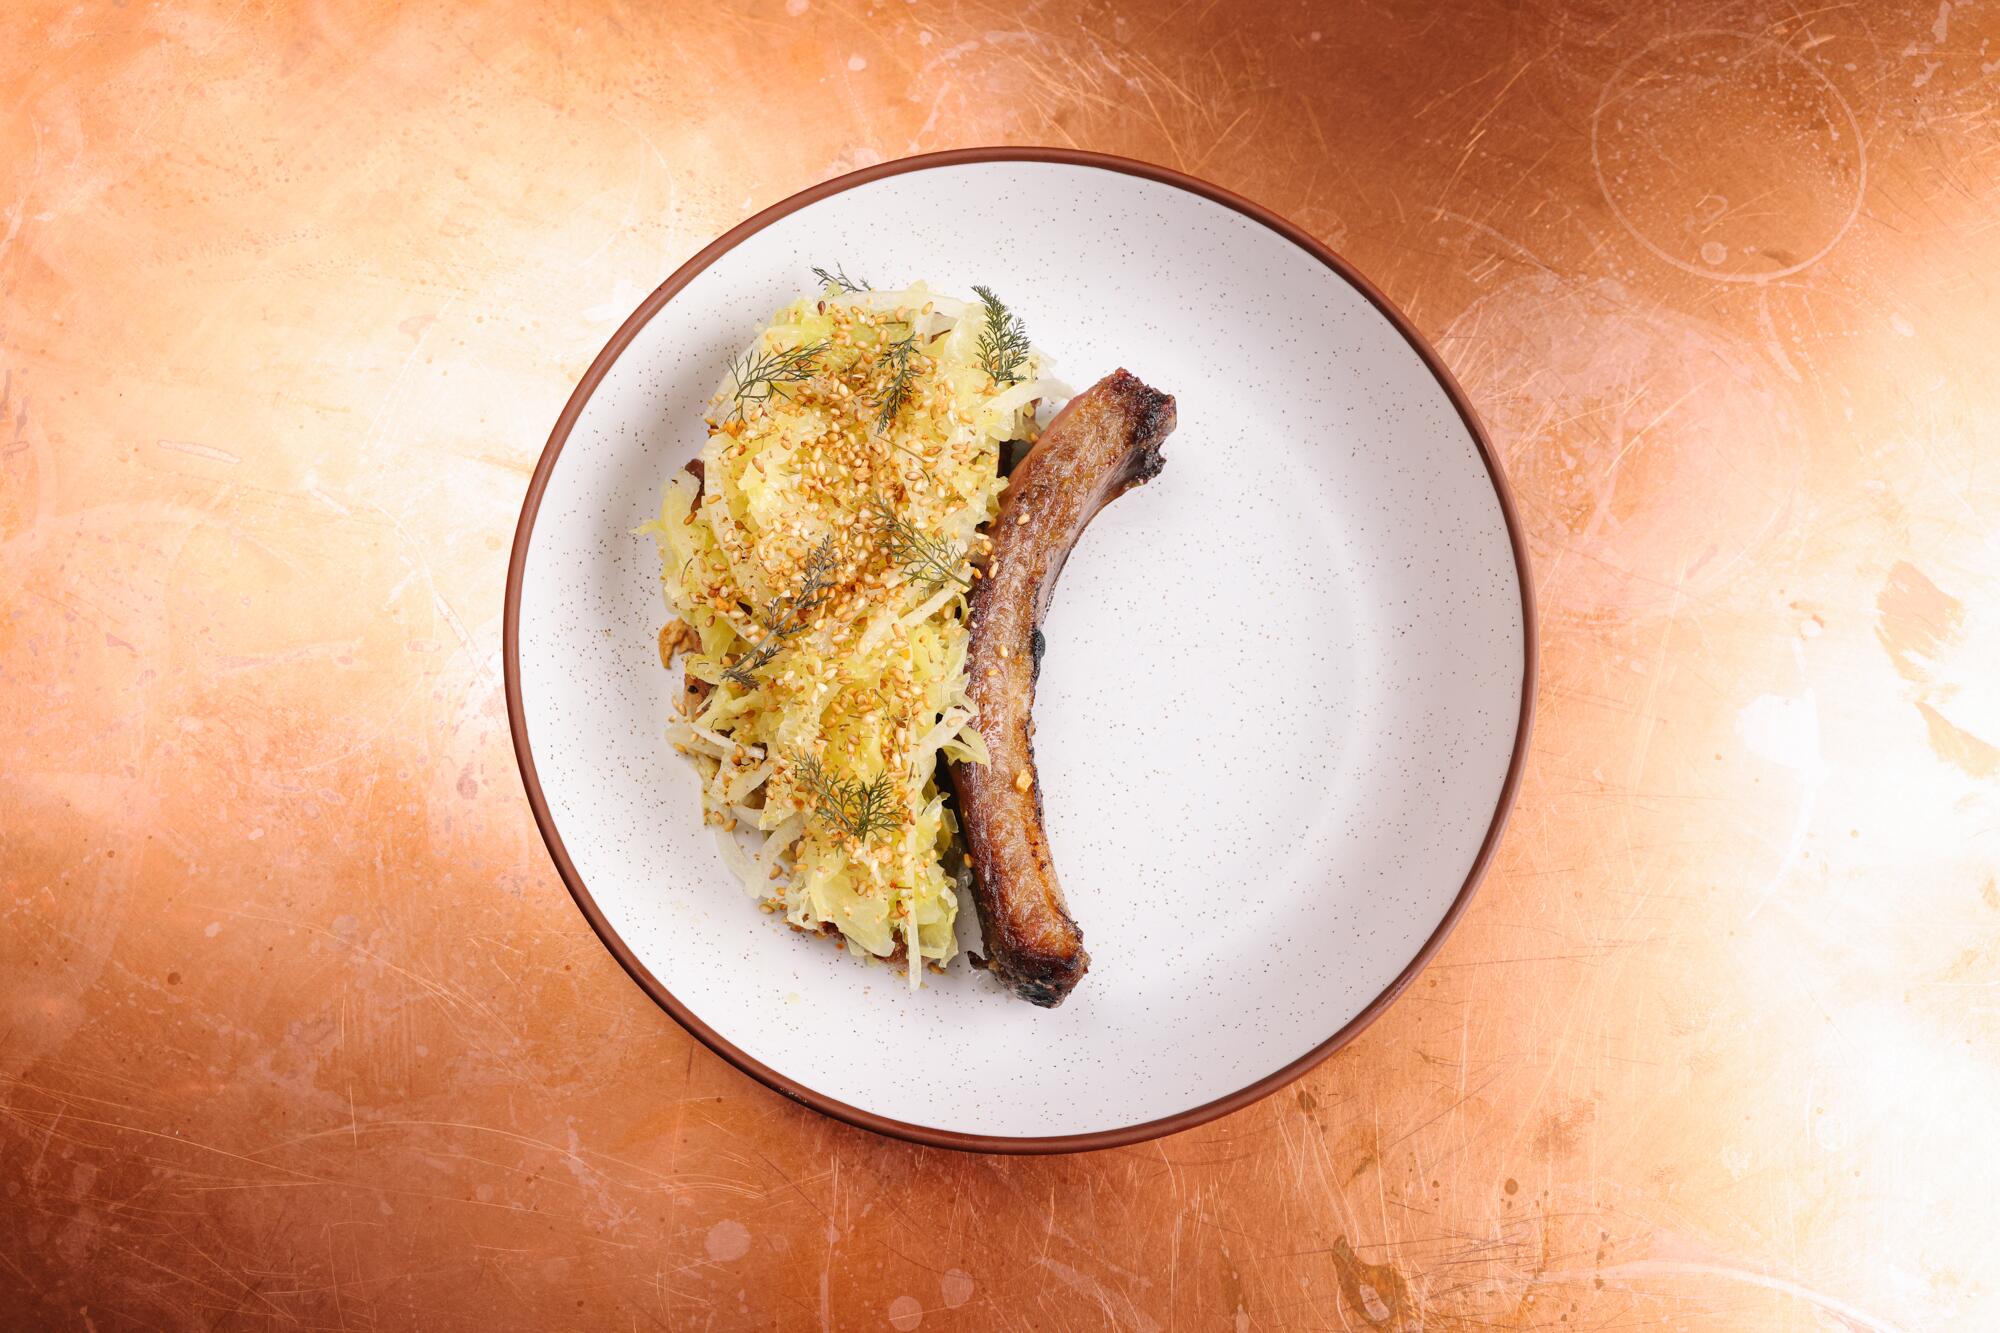 The Ibe?rico Pork Chop dish with cabbage and fennel pollen furikake is seen at Bar Chelou.